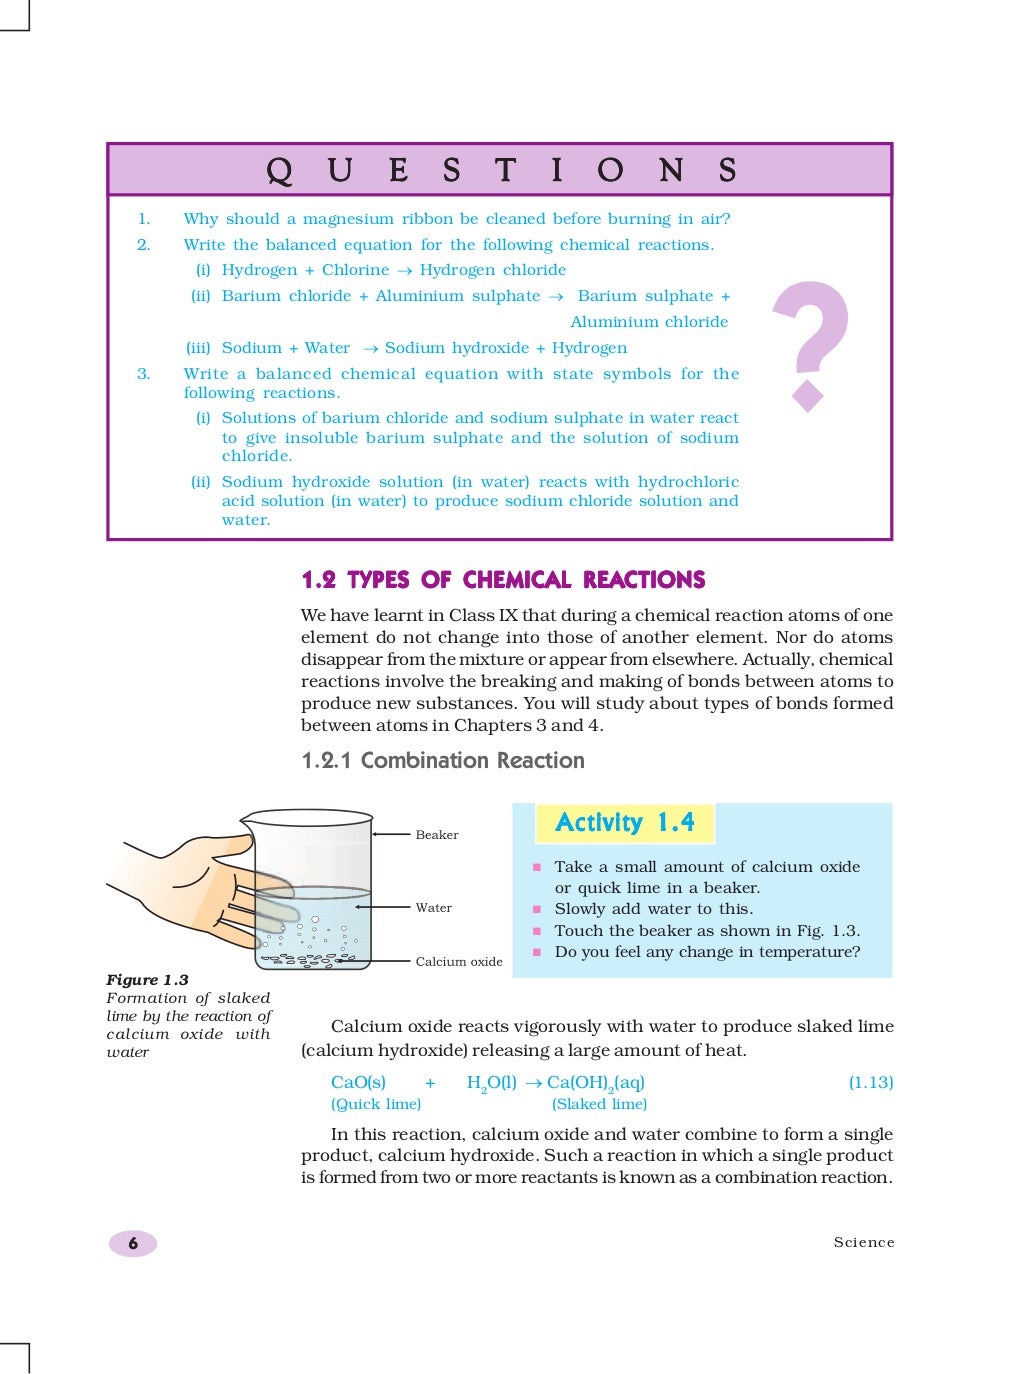 cbse class 10 science chapter 10 case study questions